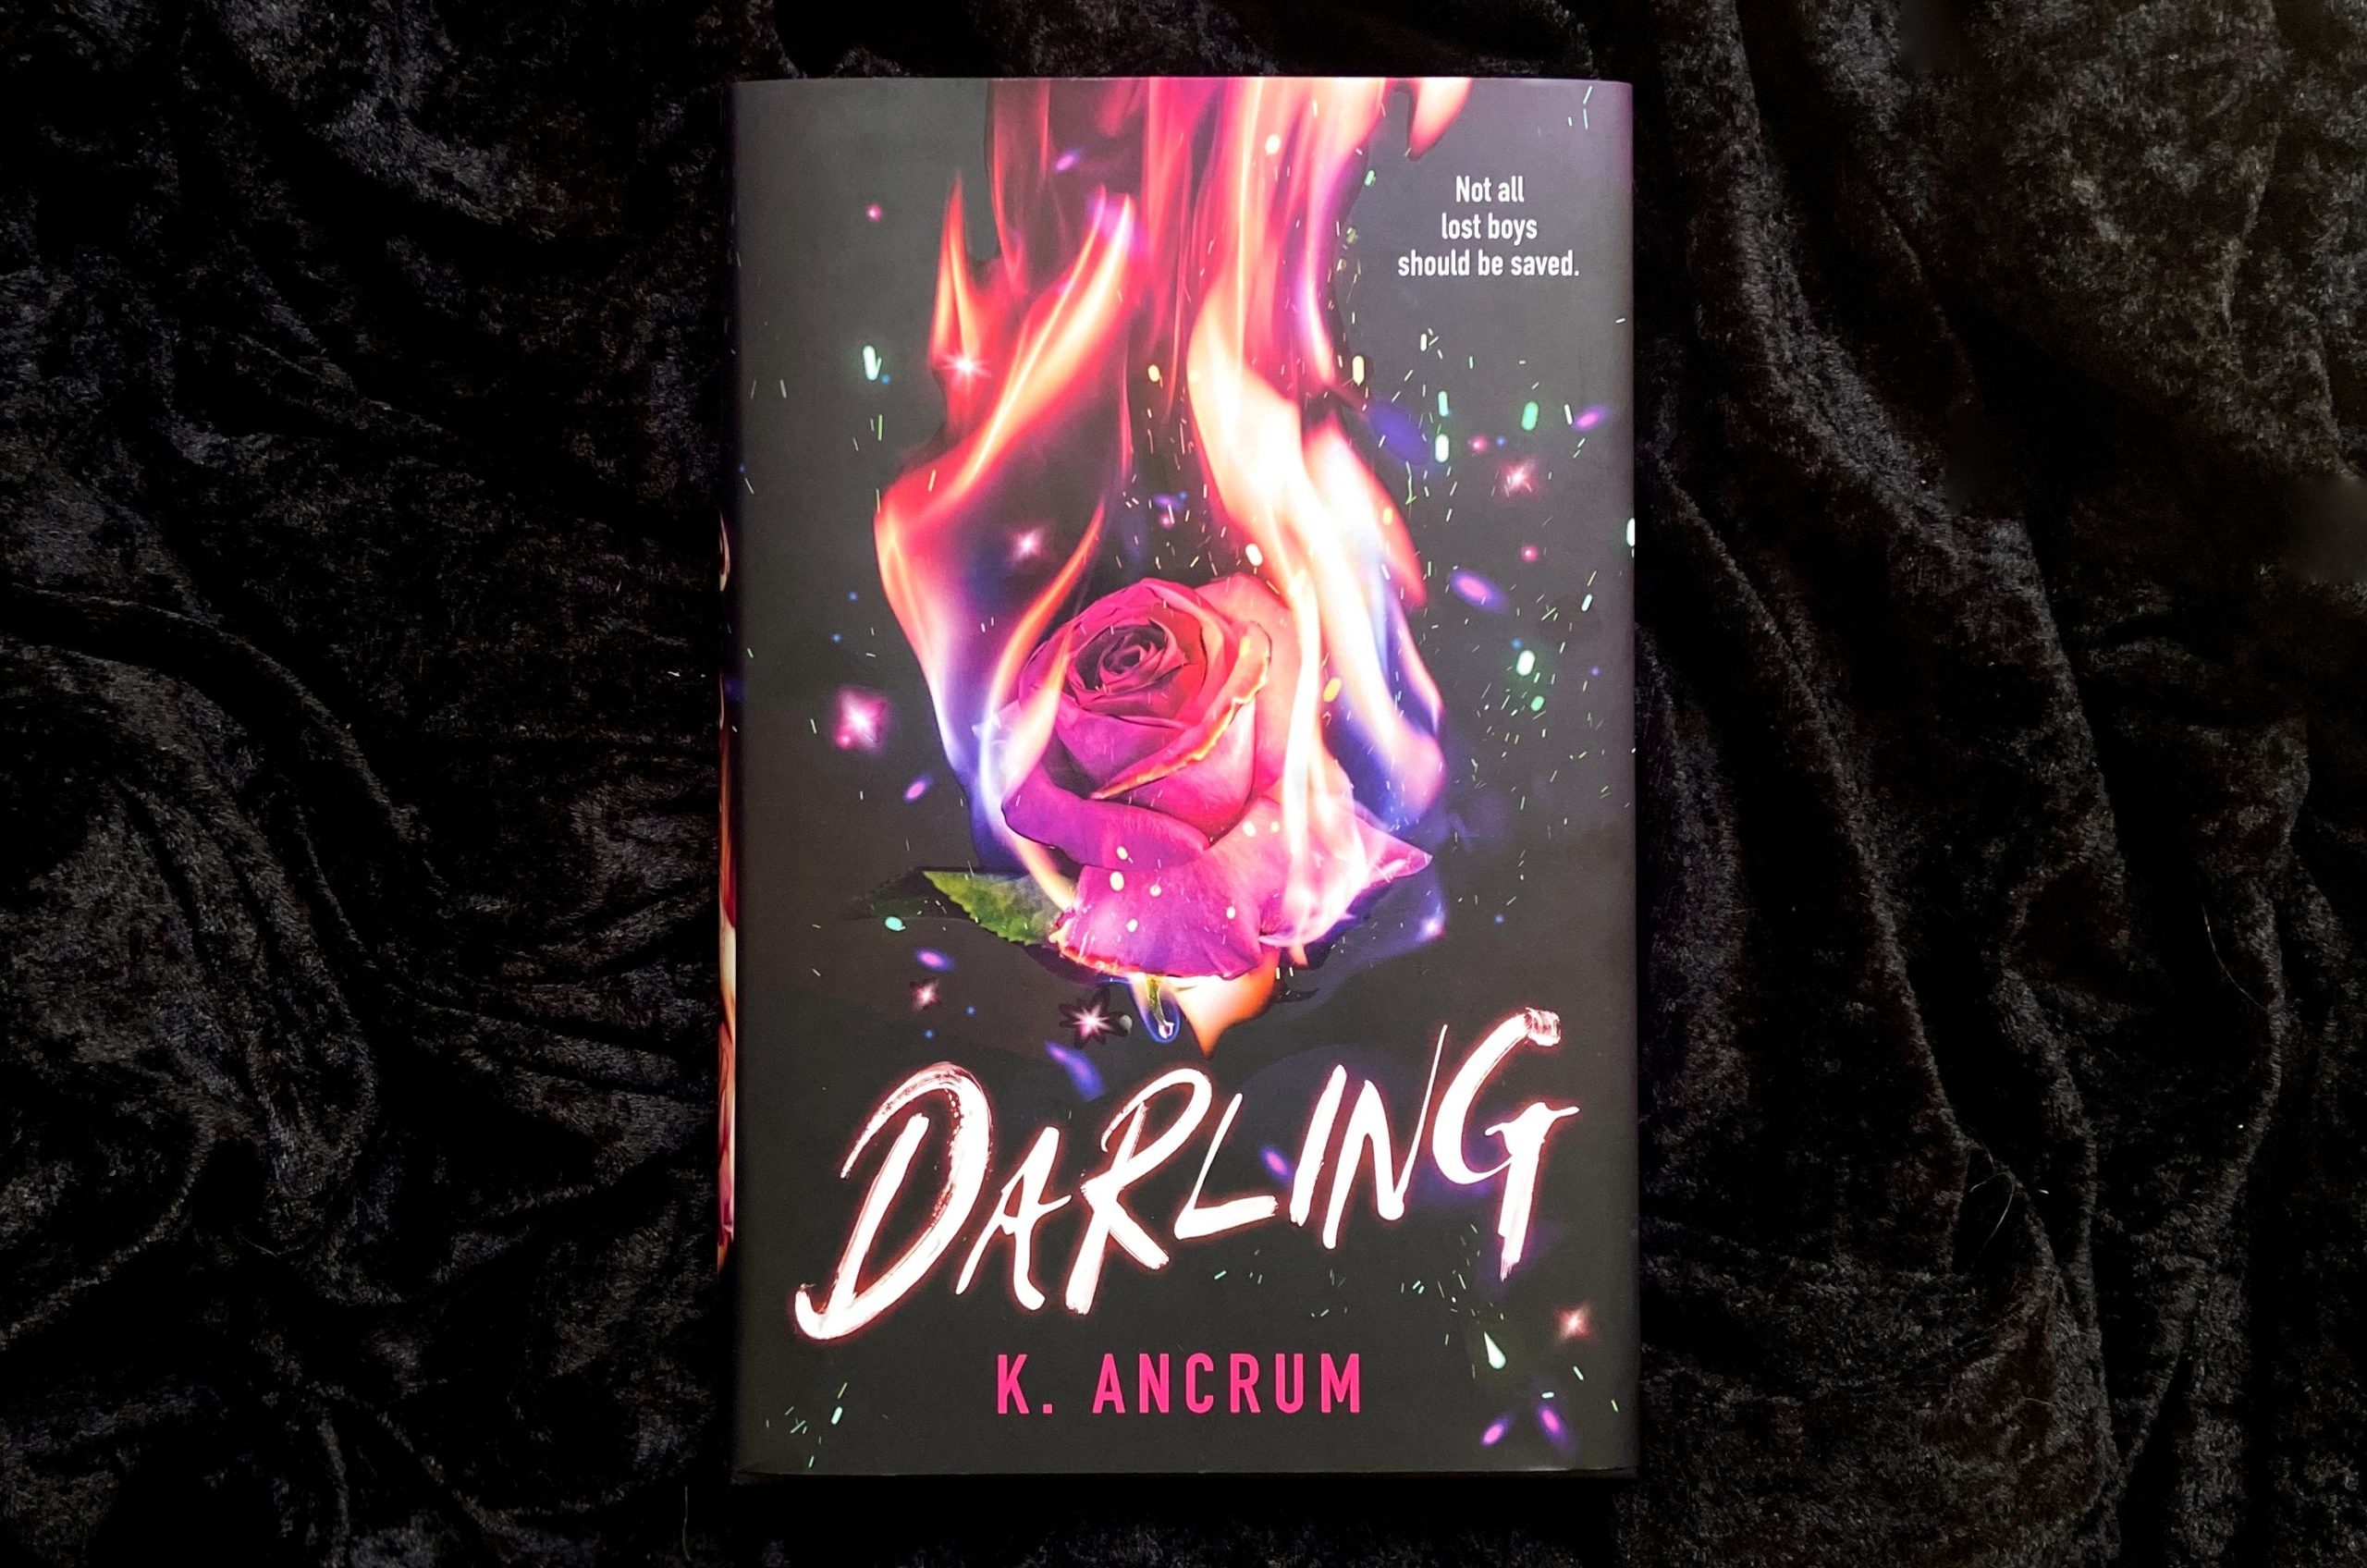 An Interview with K. Ancrum, Author of Darling